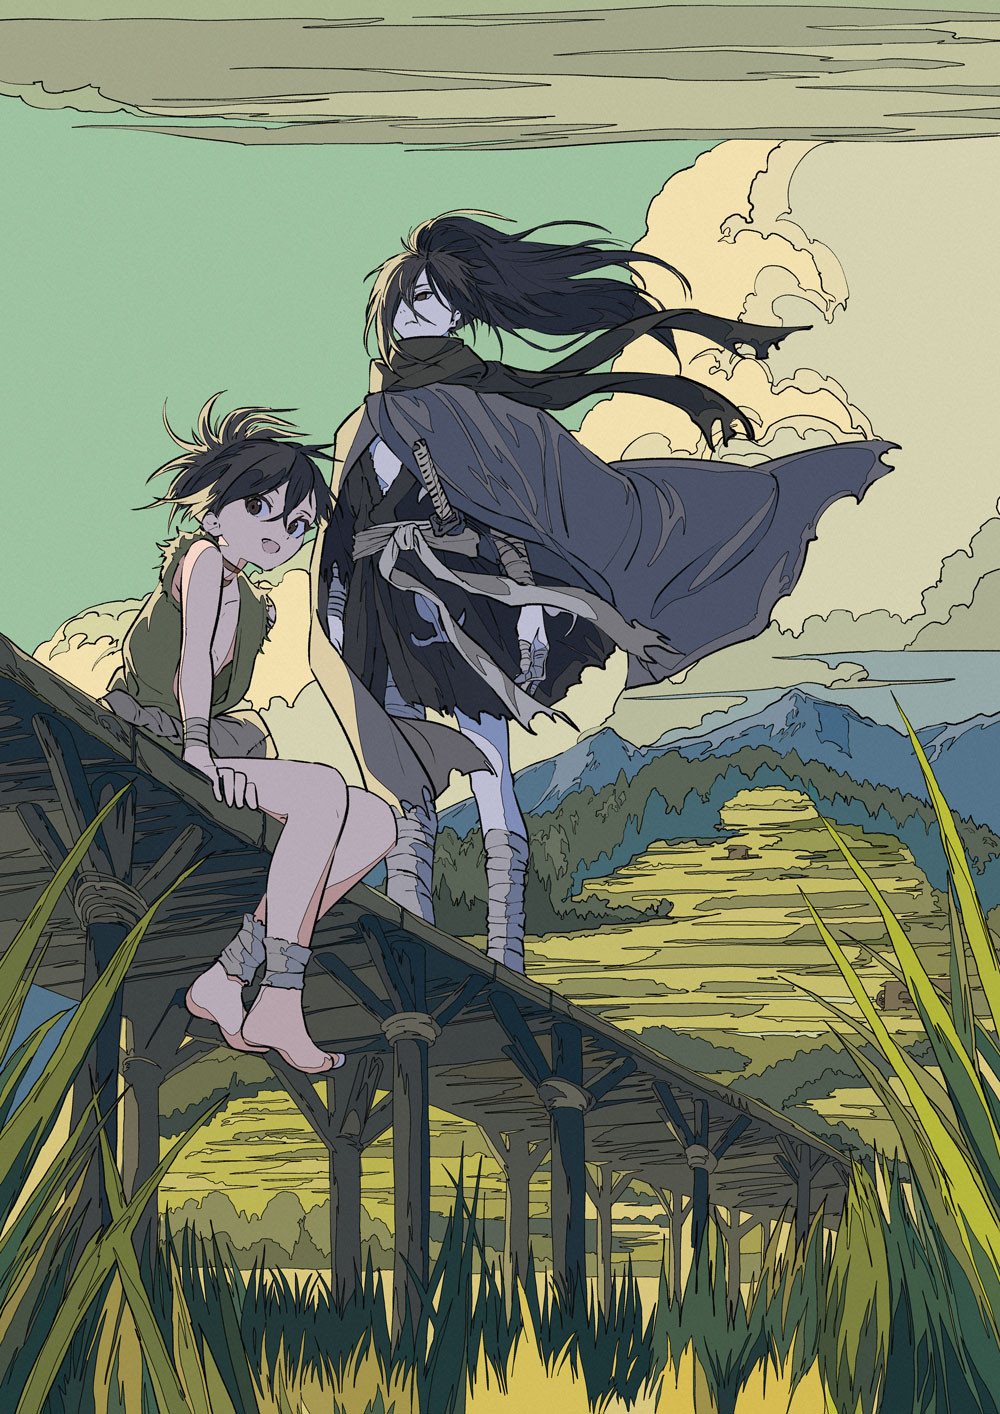 1boy 1girl bandages barefoot black_eyes black_hair cloak clouds cogecha commentary_request dororo_(character) dororo_(tezuka) guest_art highres hyakkimaru_(dororo) japanese_clothes katana kimono long_hair looking_at_viewer mountain nature open_mouth outdoors ponytail scarf scenery short_hair sitting sky smile sword weapon